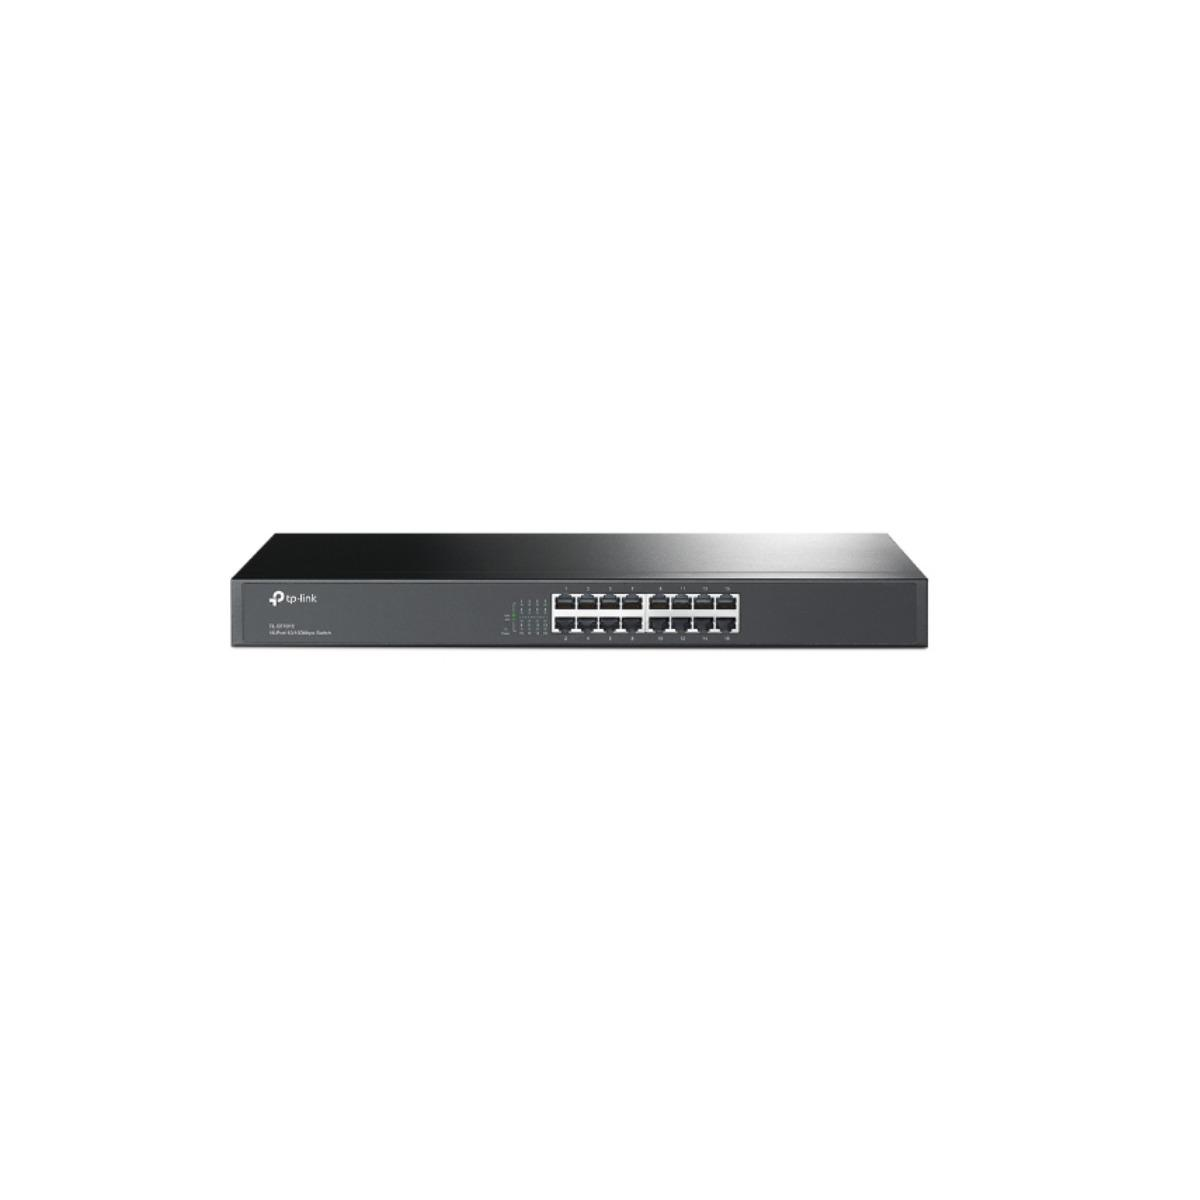 16 Switch TP-LINK TL-SF1016